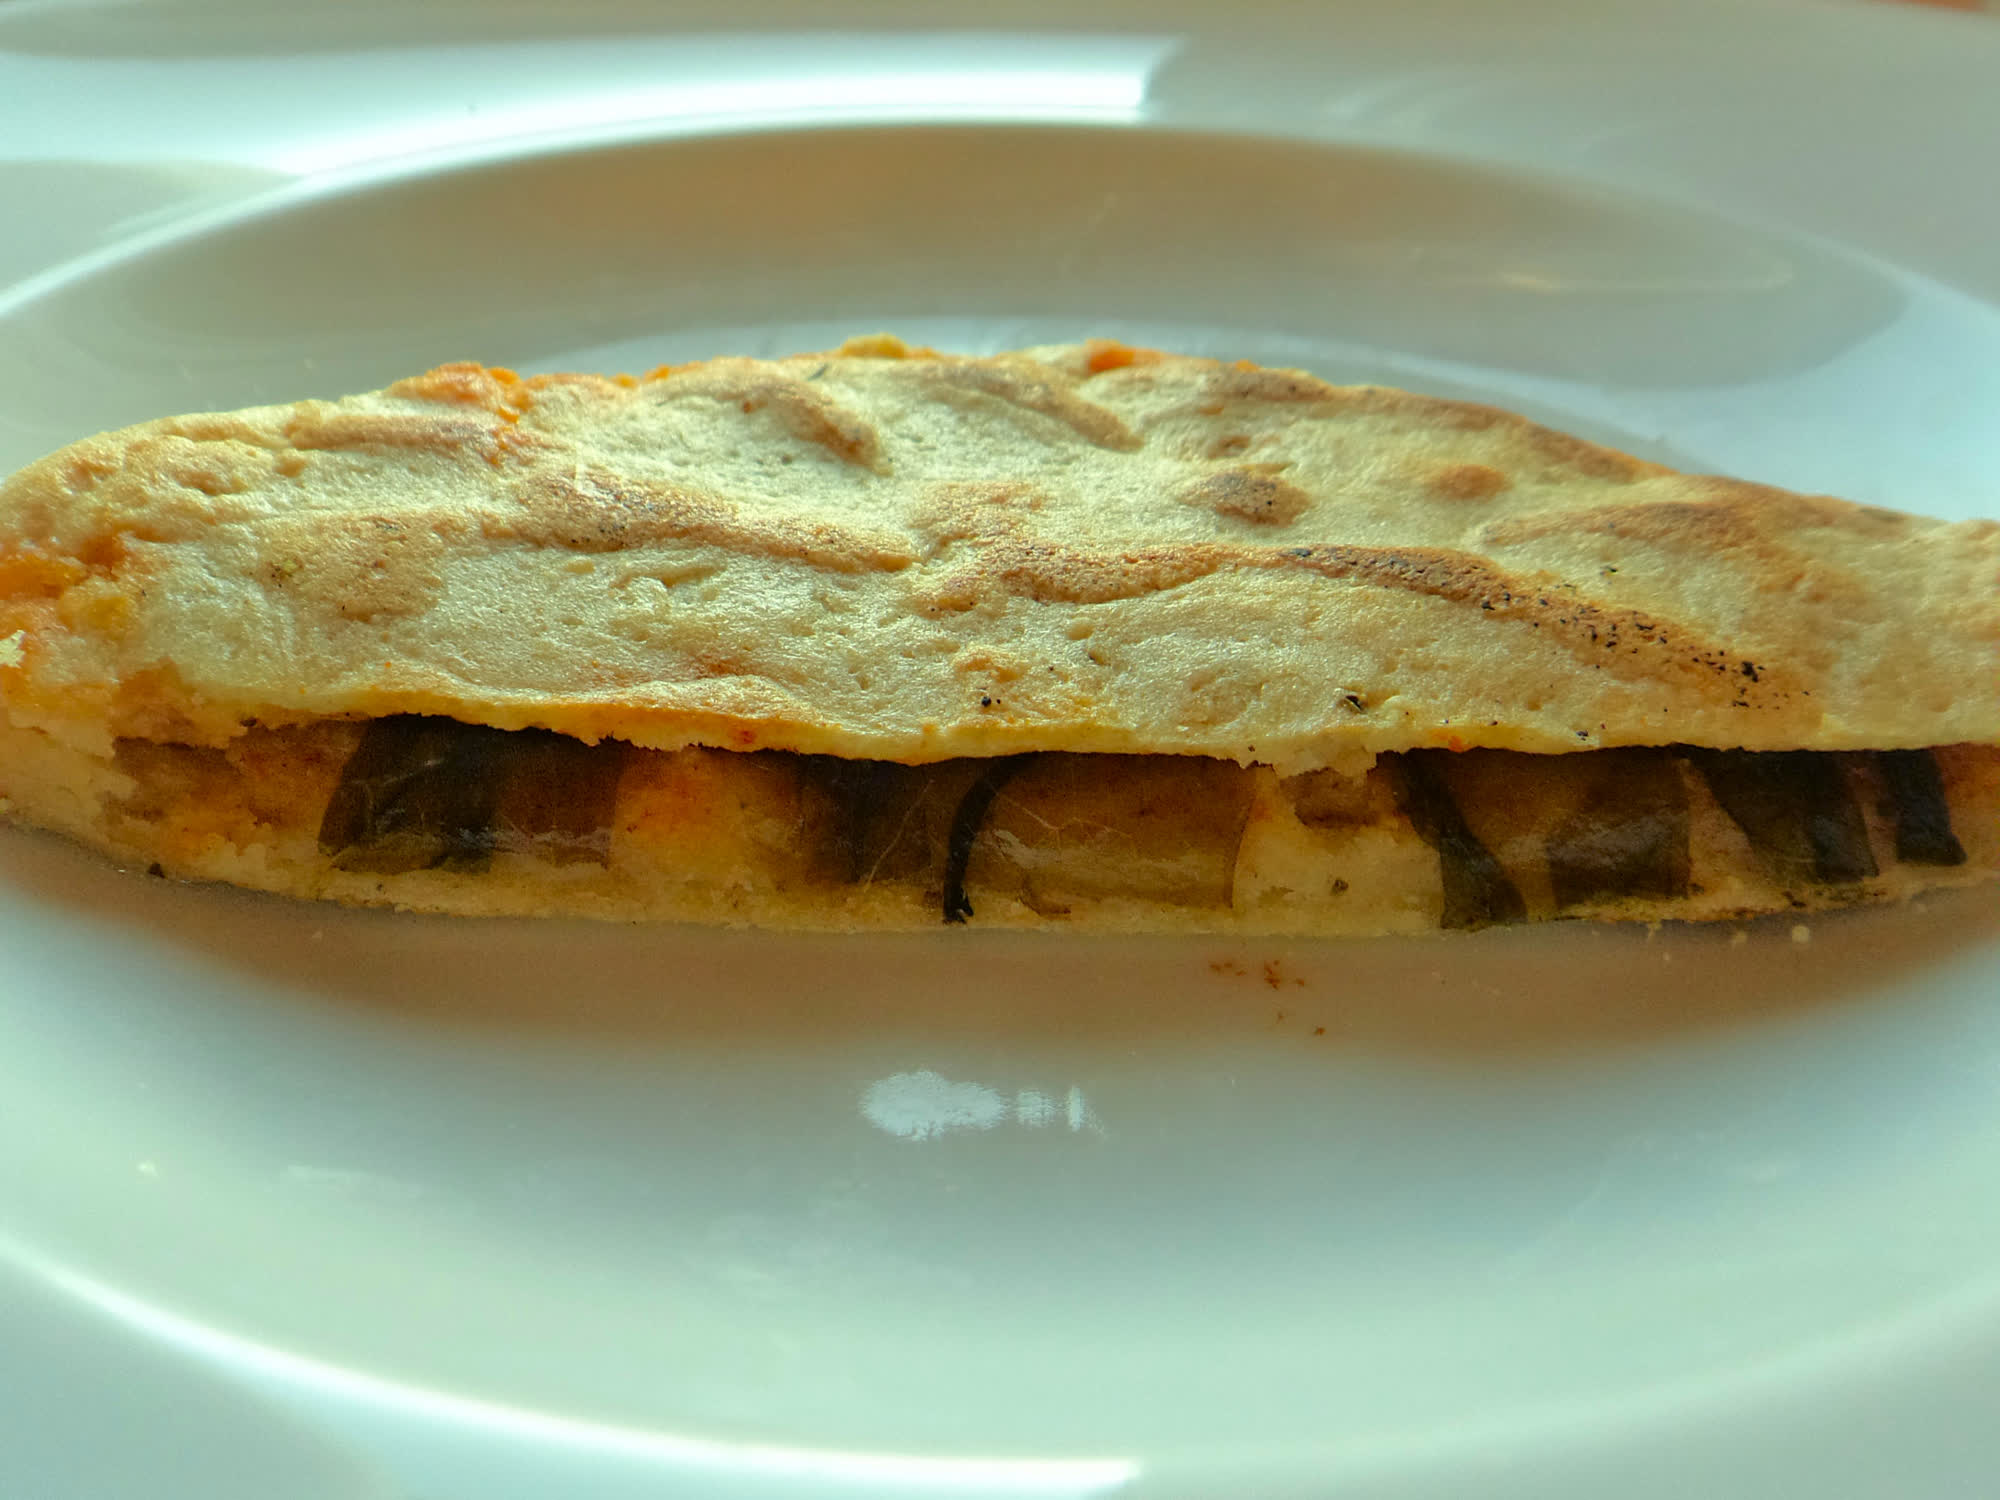 Mexican flatbread stuffed with lettuce